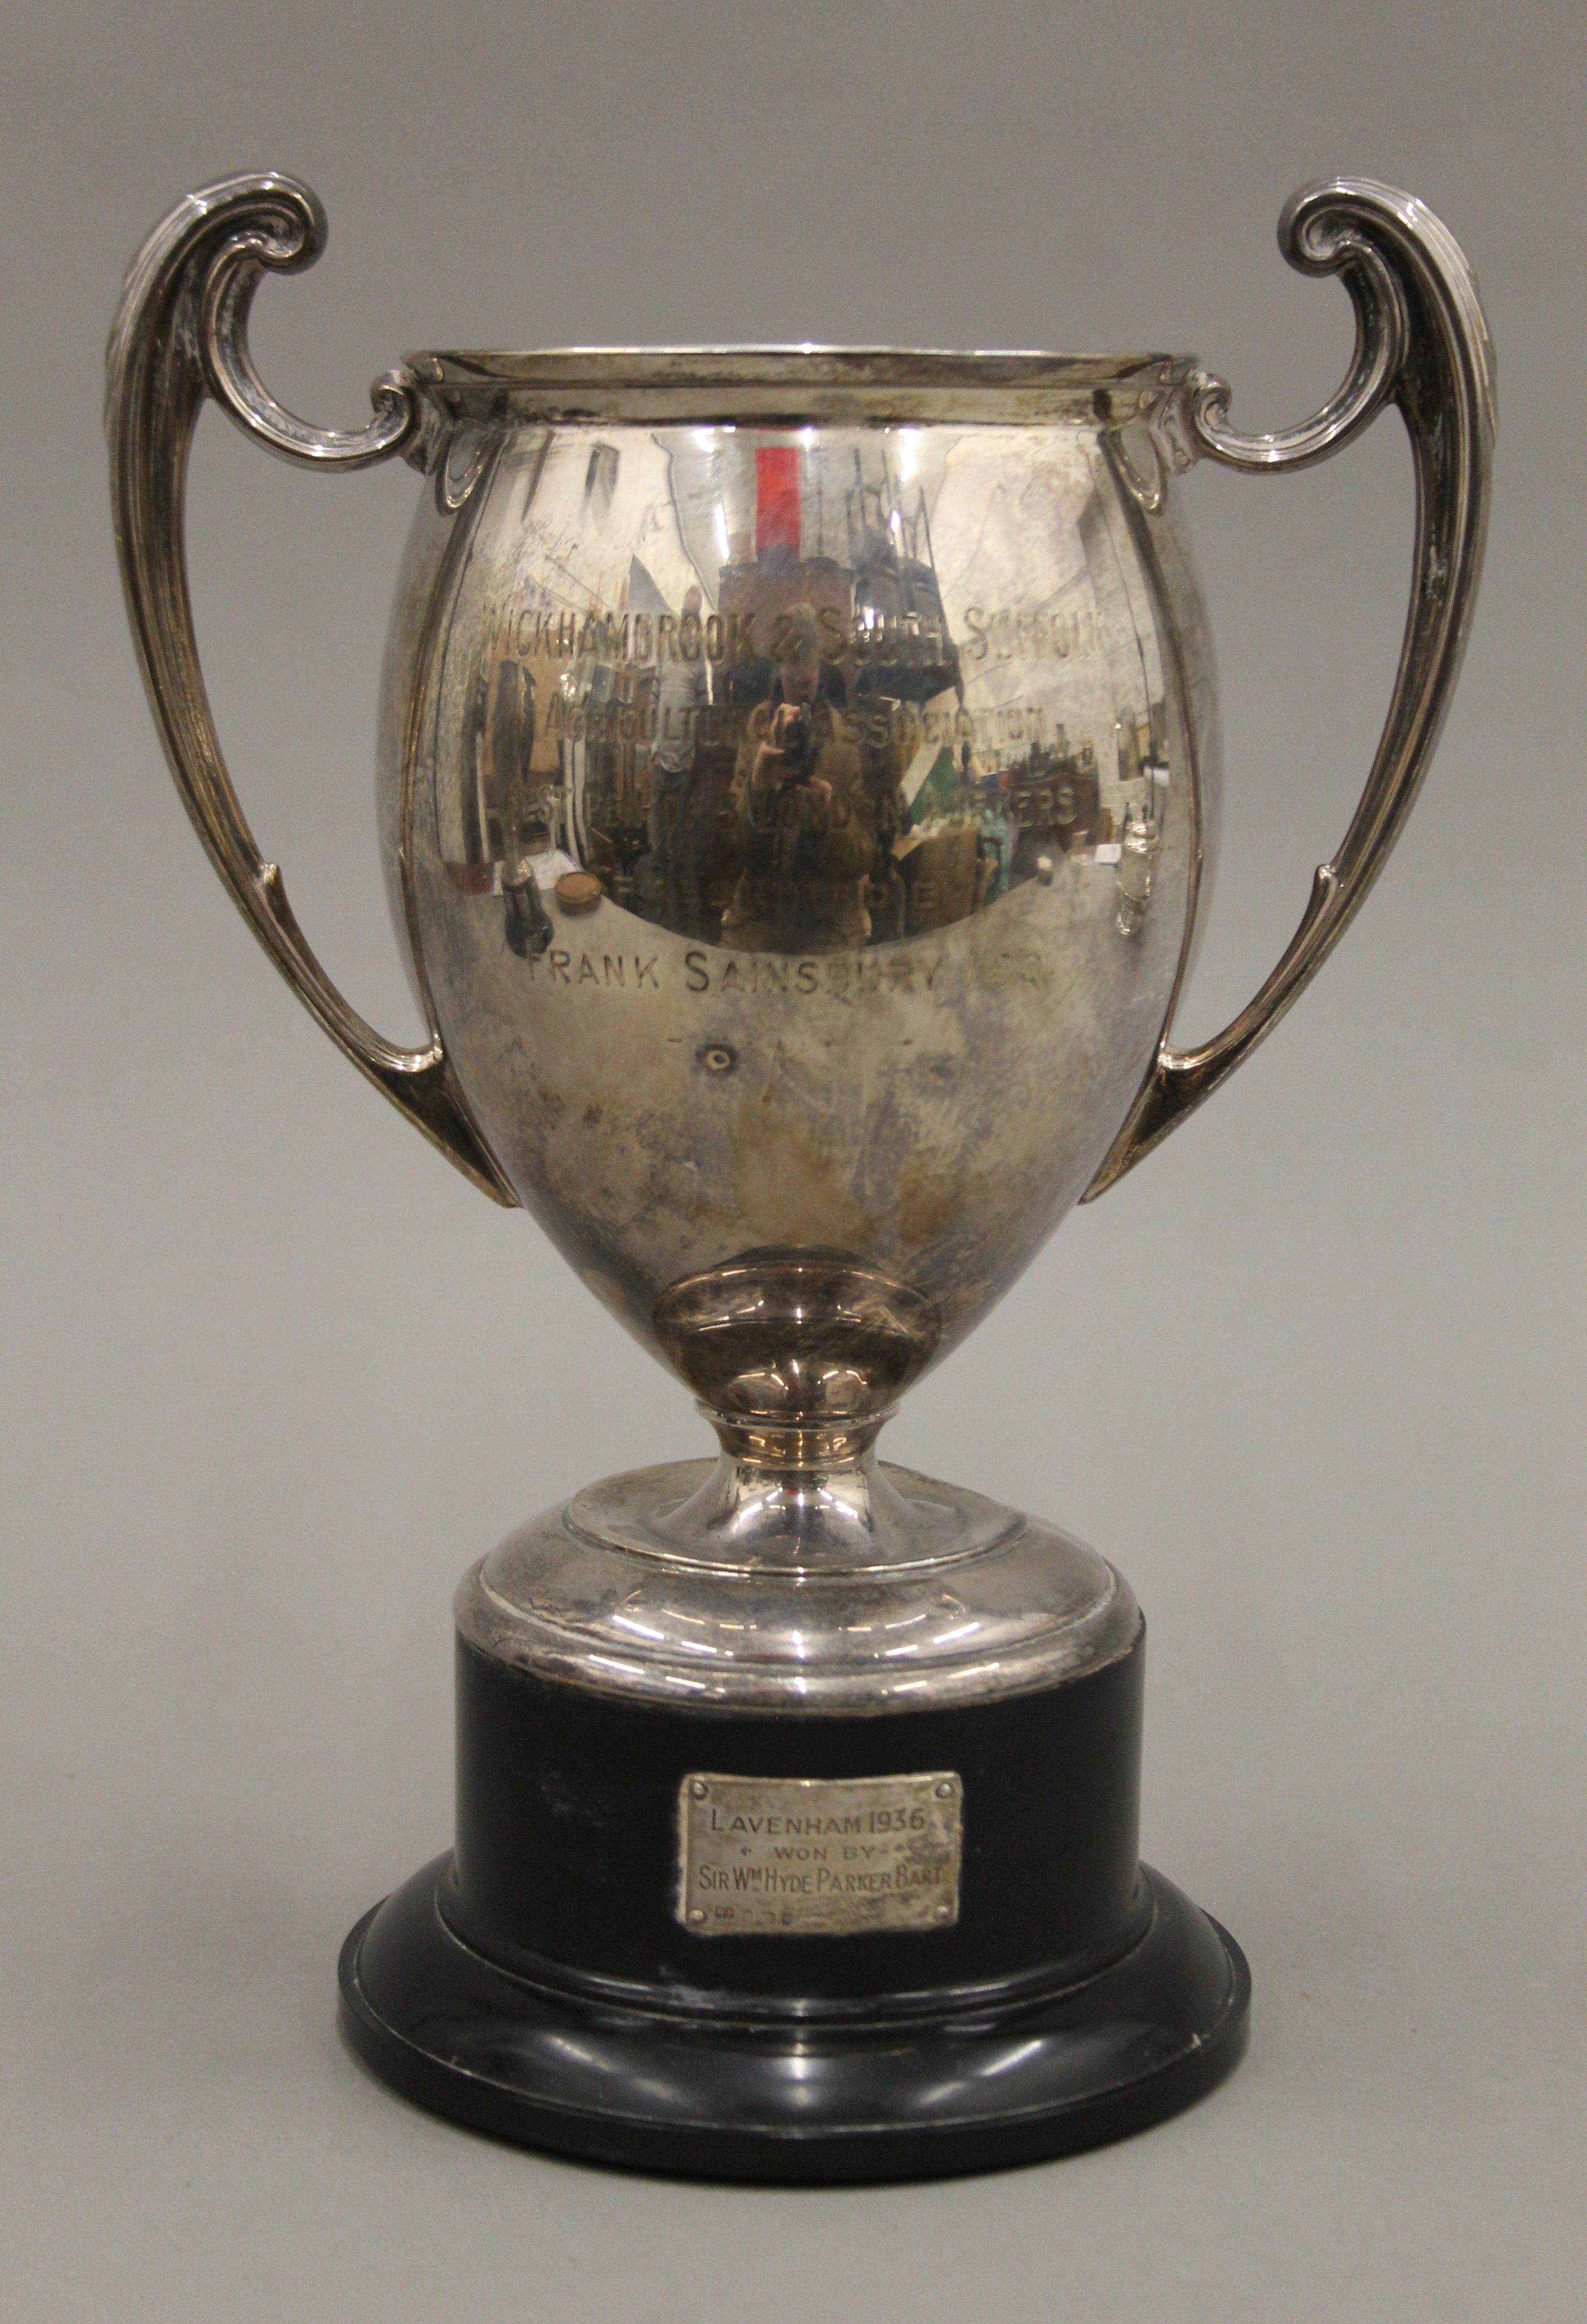 A silver twin handled trophy cup on stand. 25 cm high. 580.1 grammes total weight including base. - Image 2 of 6